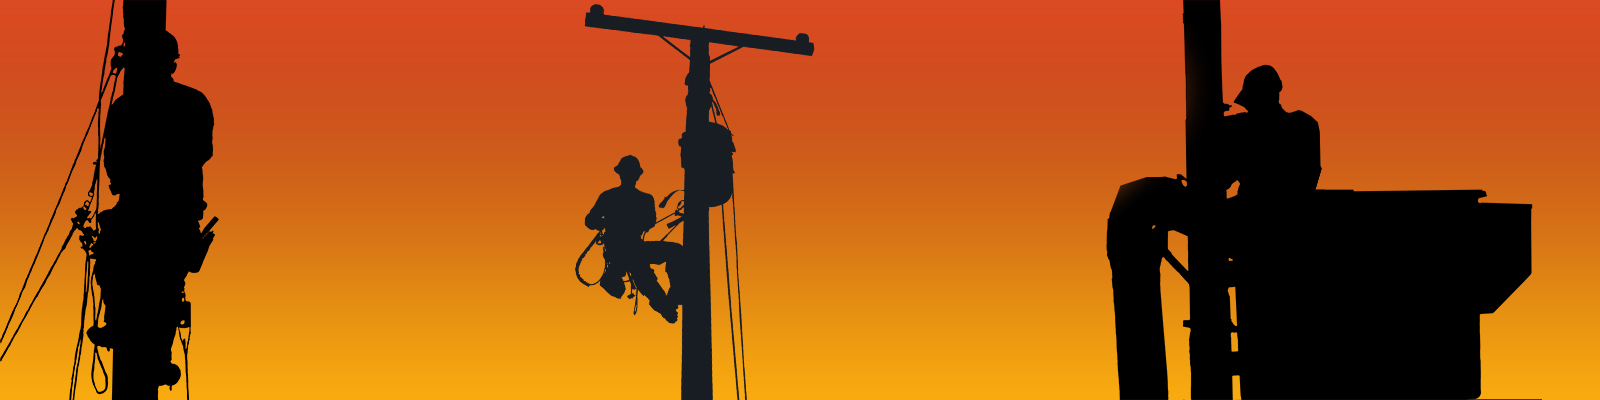 Utility Safety Podcast by Incident Prevention Magazine